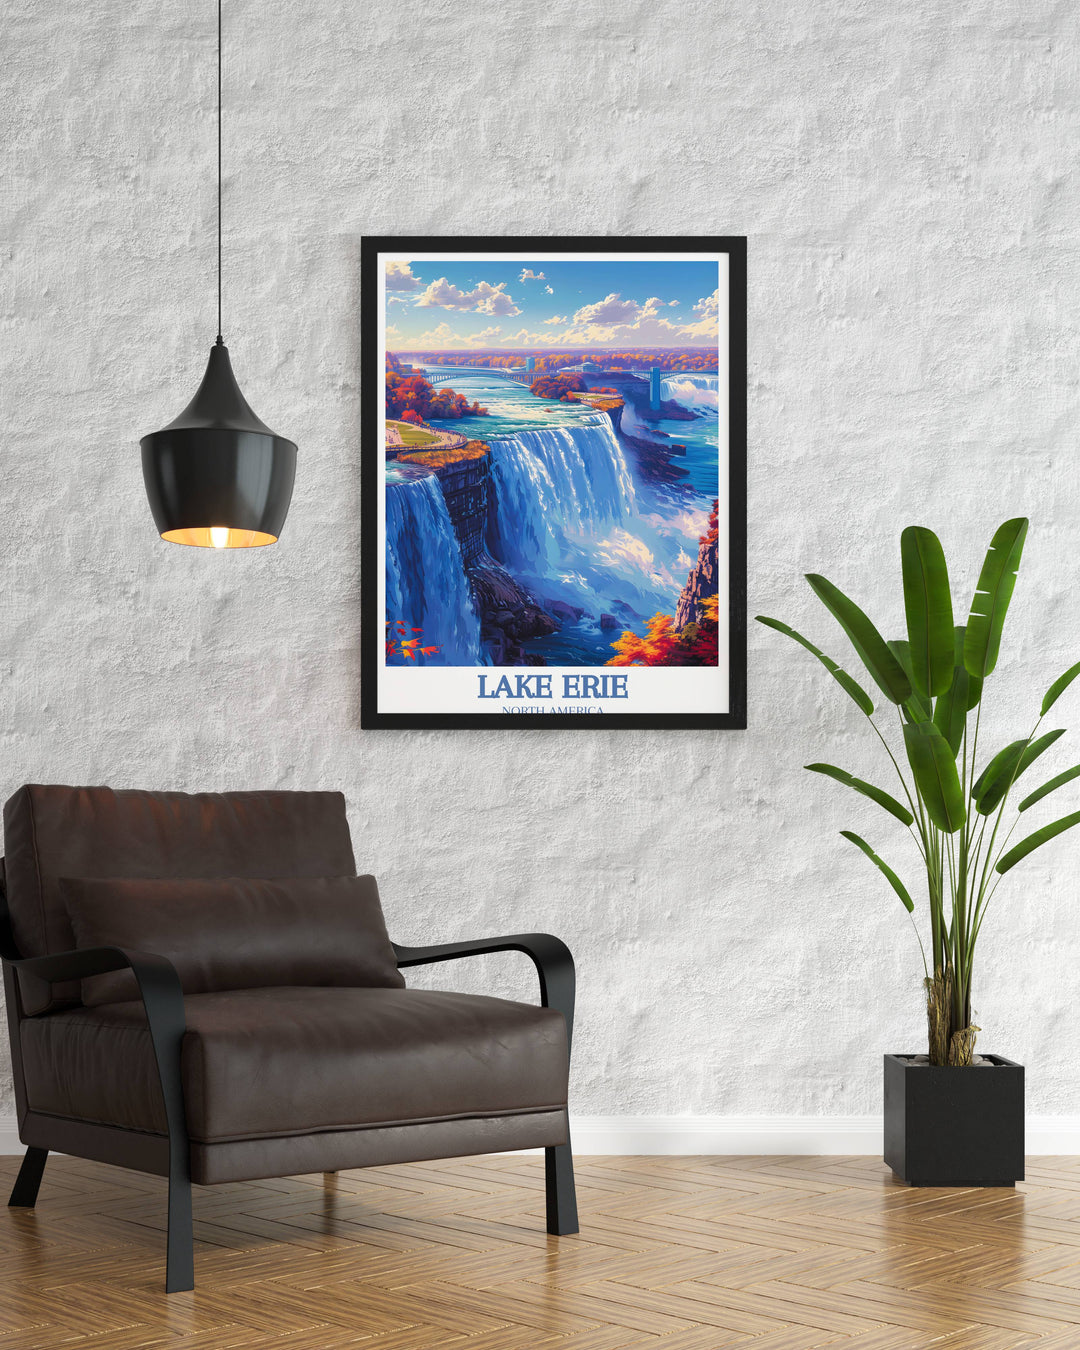 Find the ideal anniversary gift with a personalized Lake Erie artwork, a lasting symbol of love and devotion.